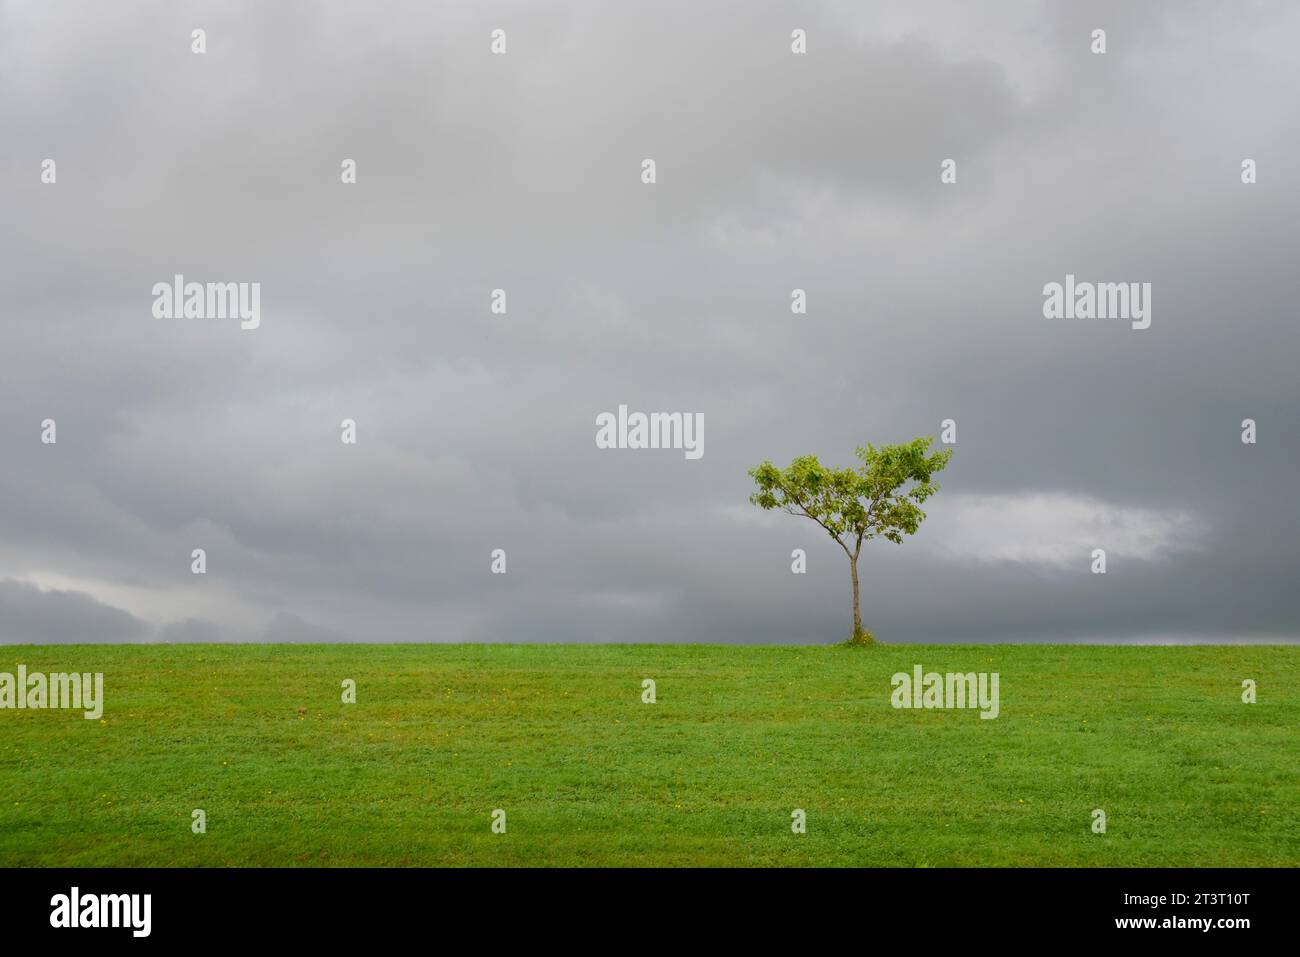 Lone tree in a grassy field on an overcast day.. Stock Photo